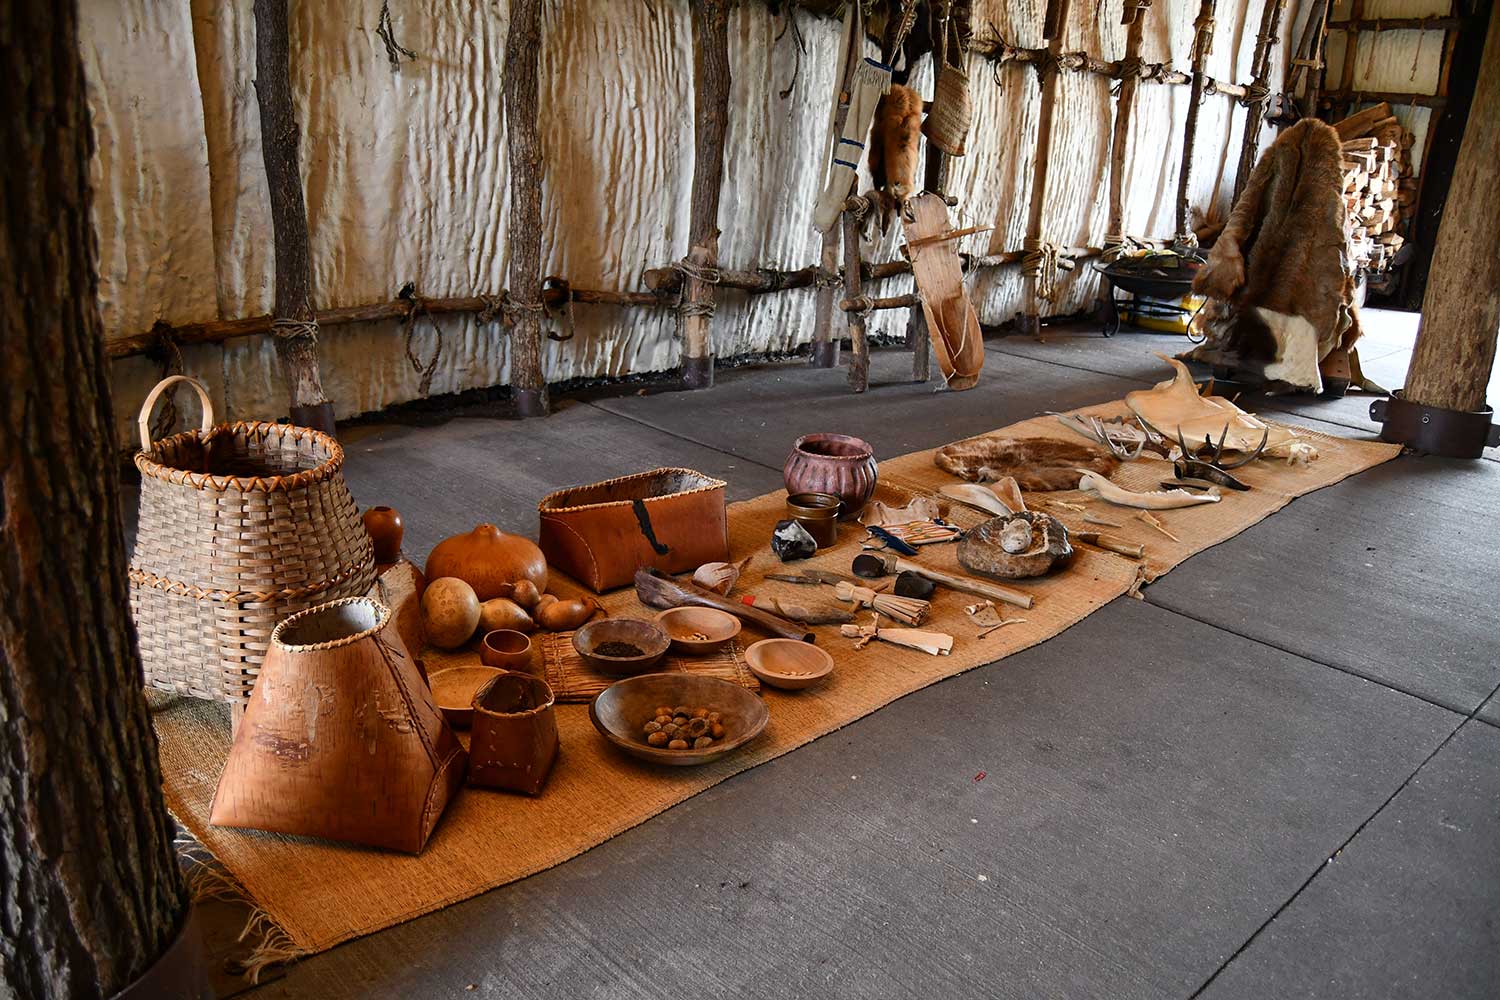 A collection of replica baskets, tools and other items using by Native peoples on the ground inside a longhouse.